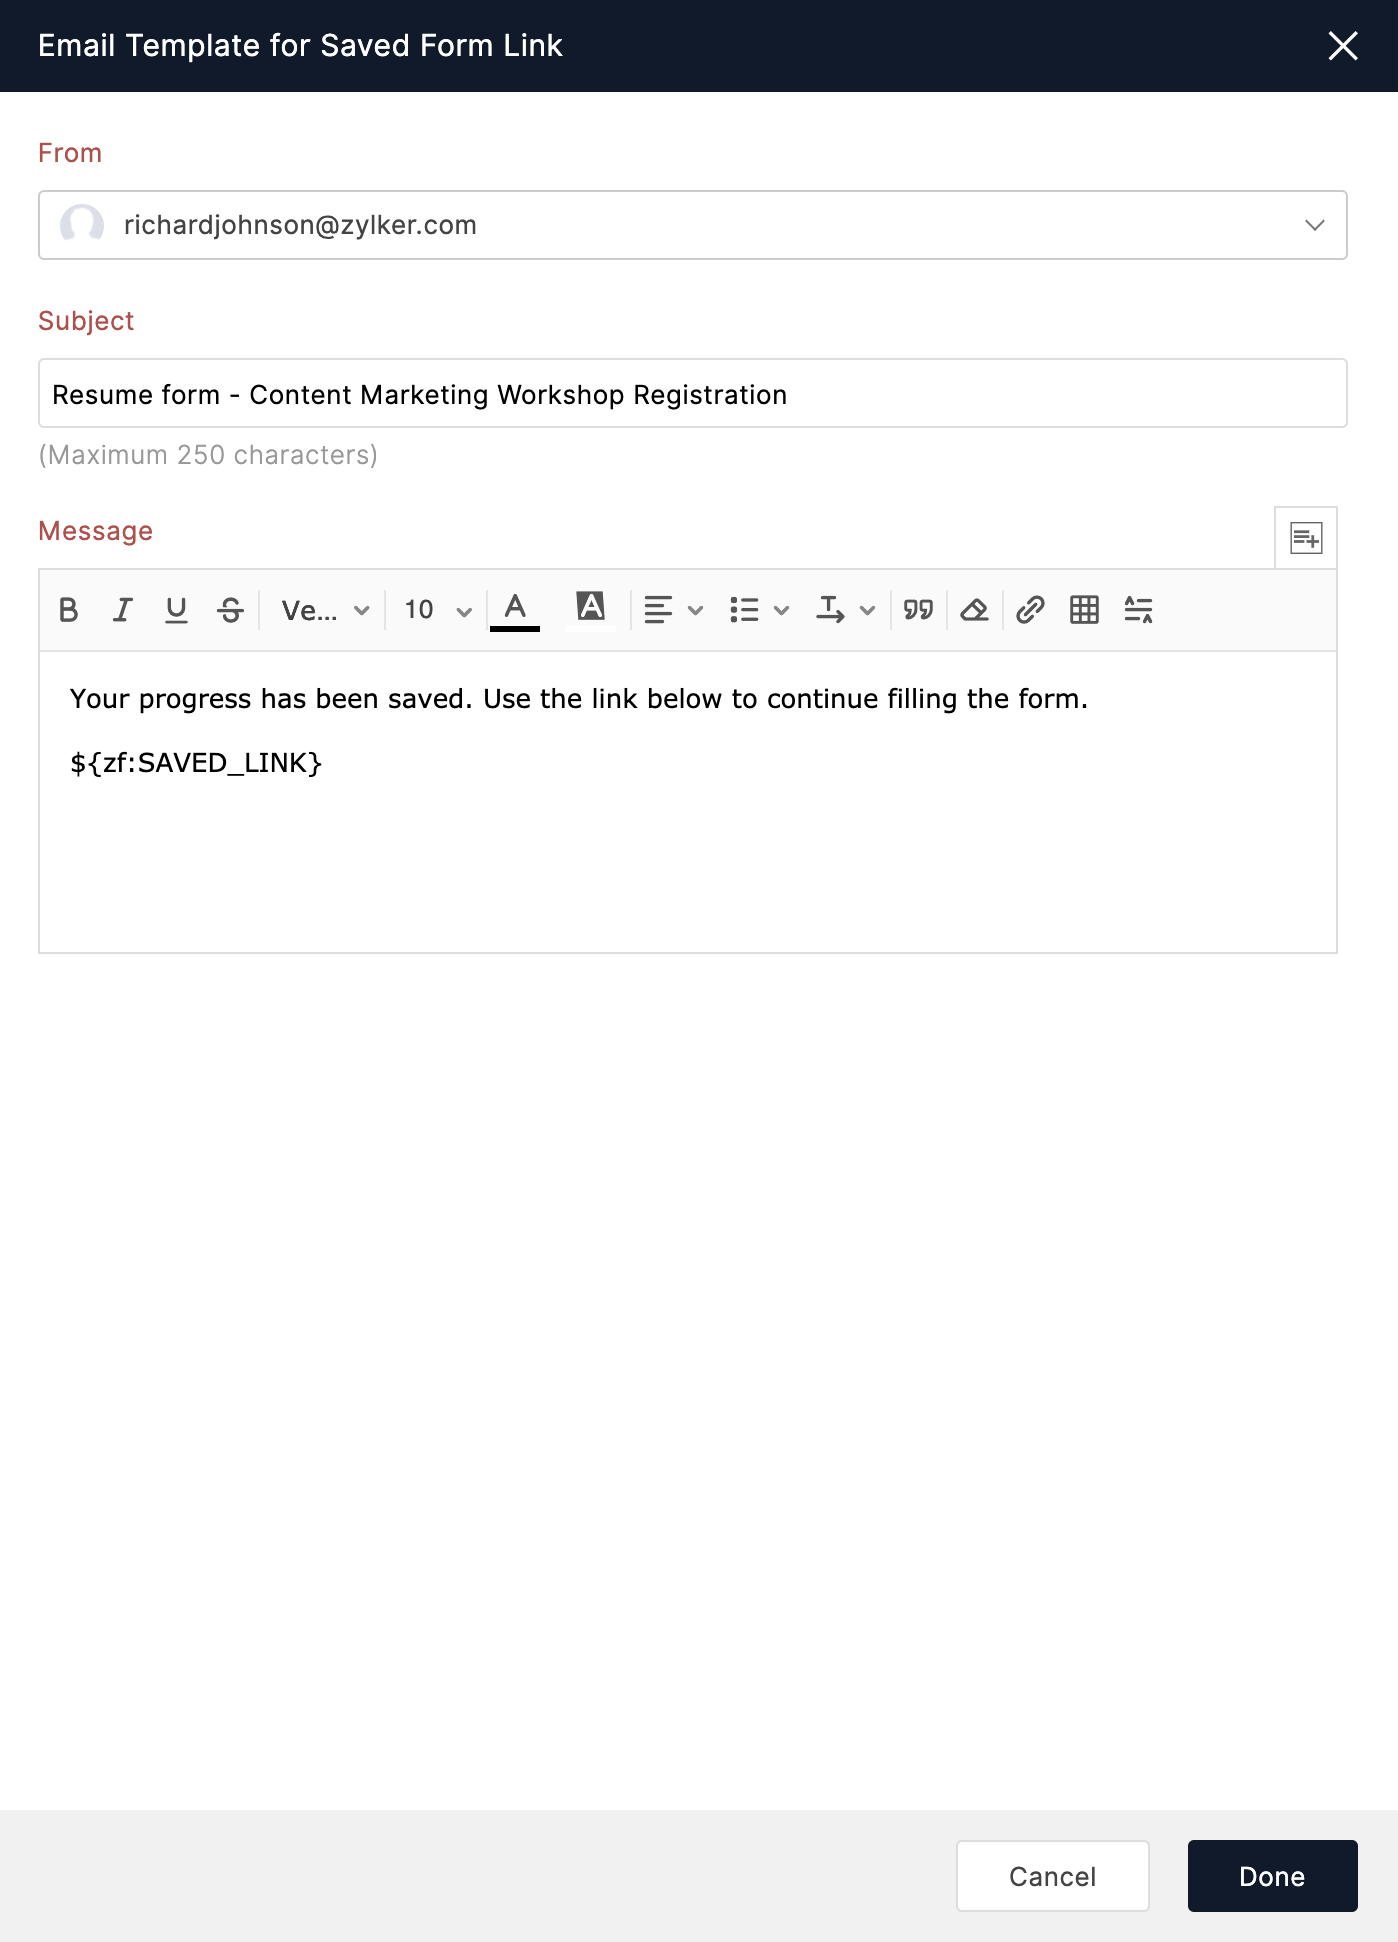 Email template to send saved form link